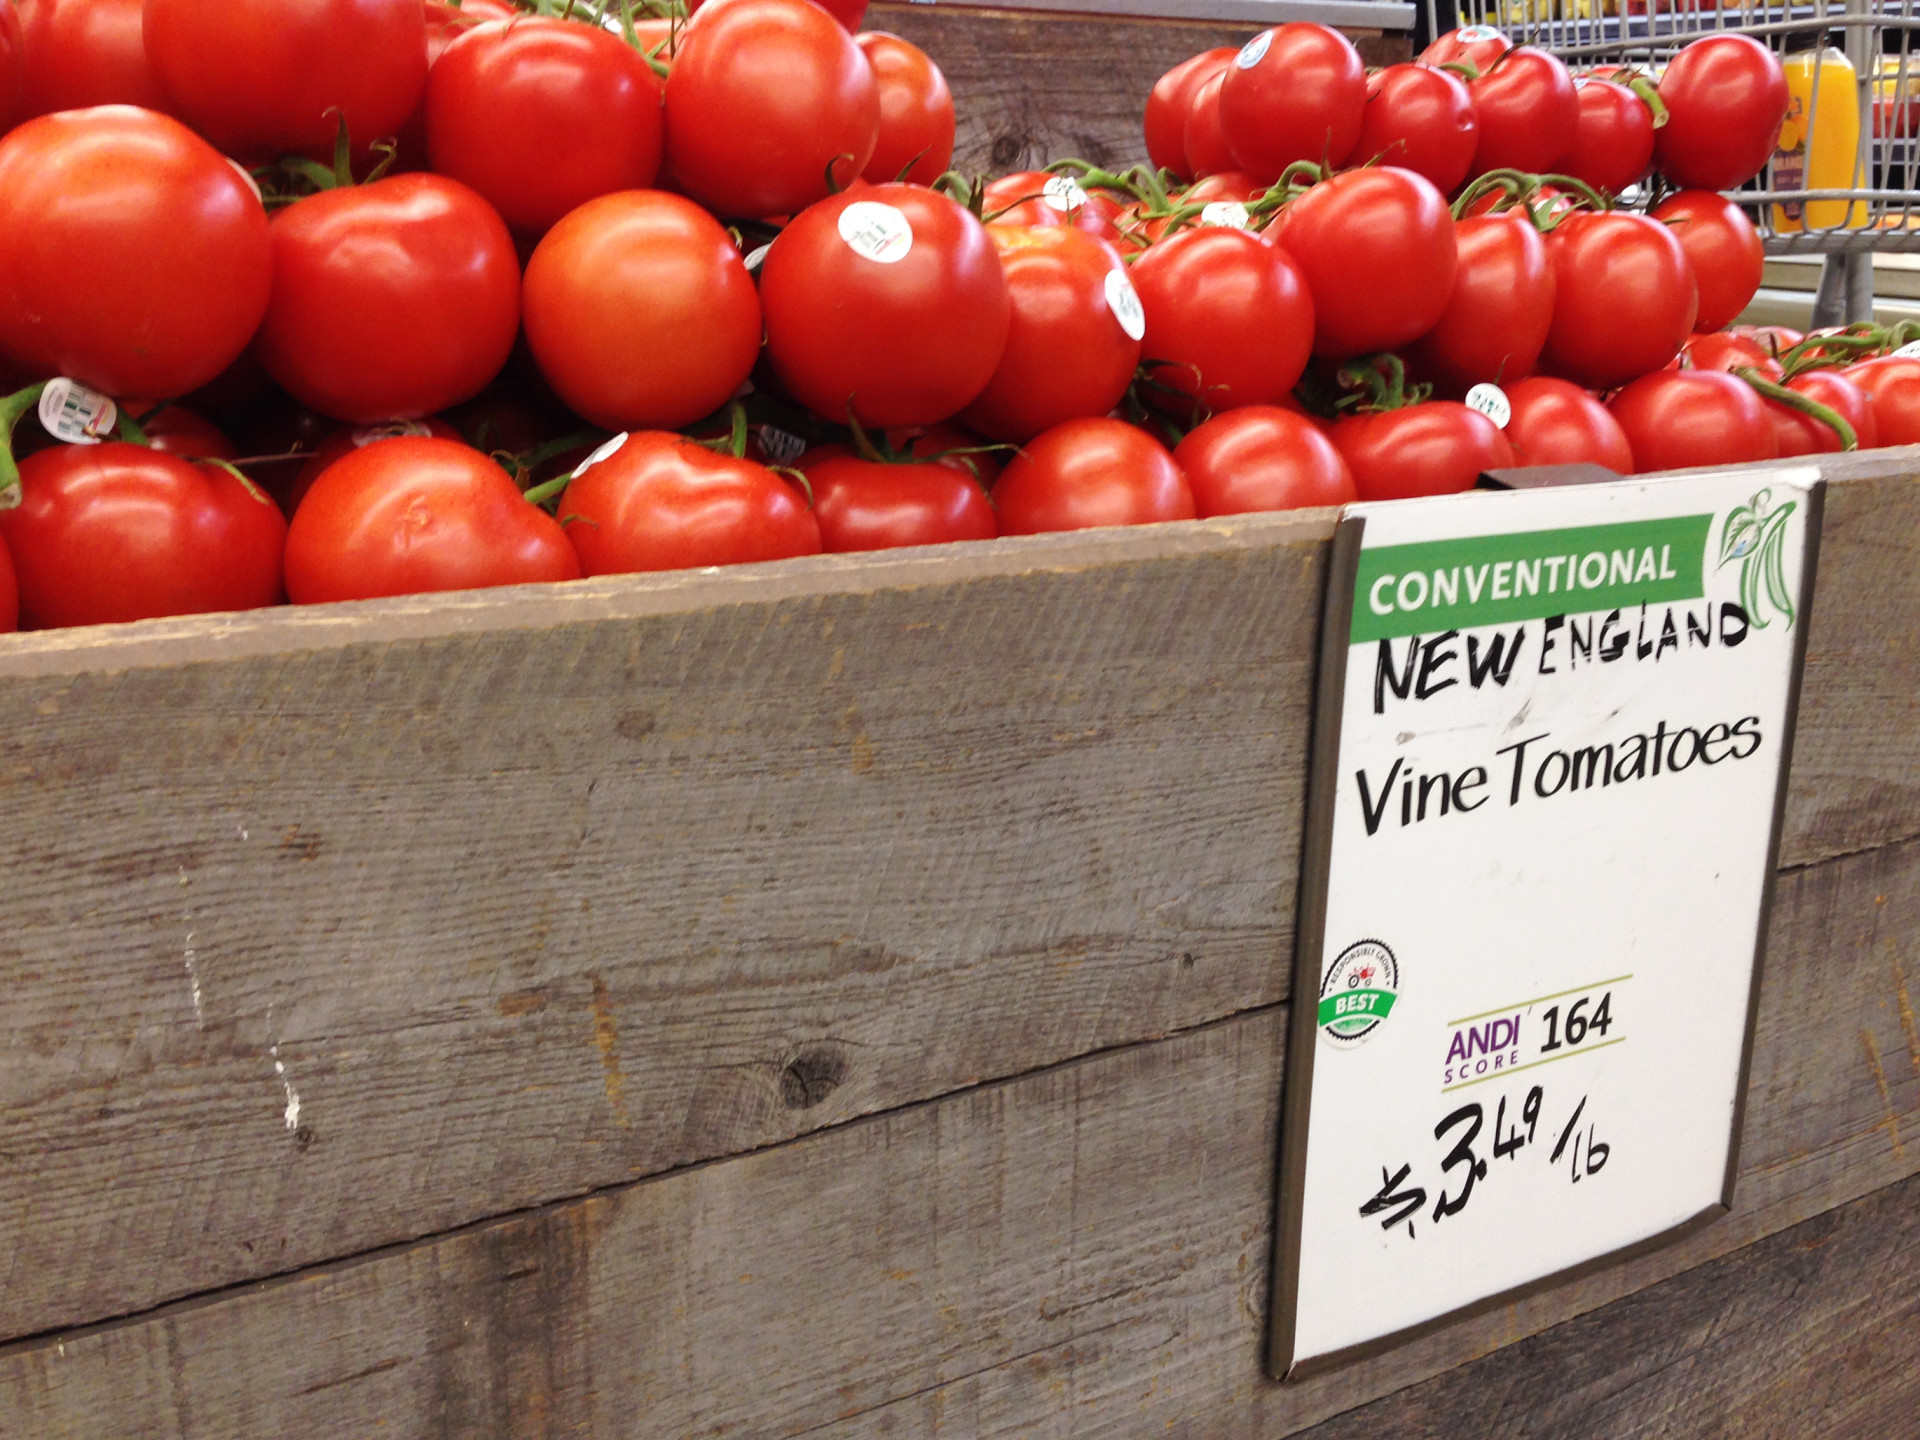 Conventionally grown tomatoes can earn a "Best" rating from Whole Foods under the company's new program. Some organic farmers are chagrined, arguing that it devalues the organic label on their products.